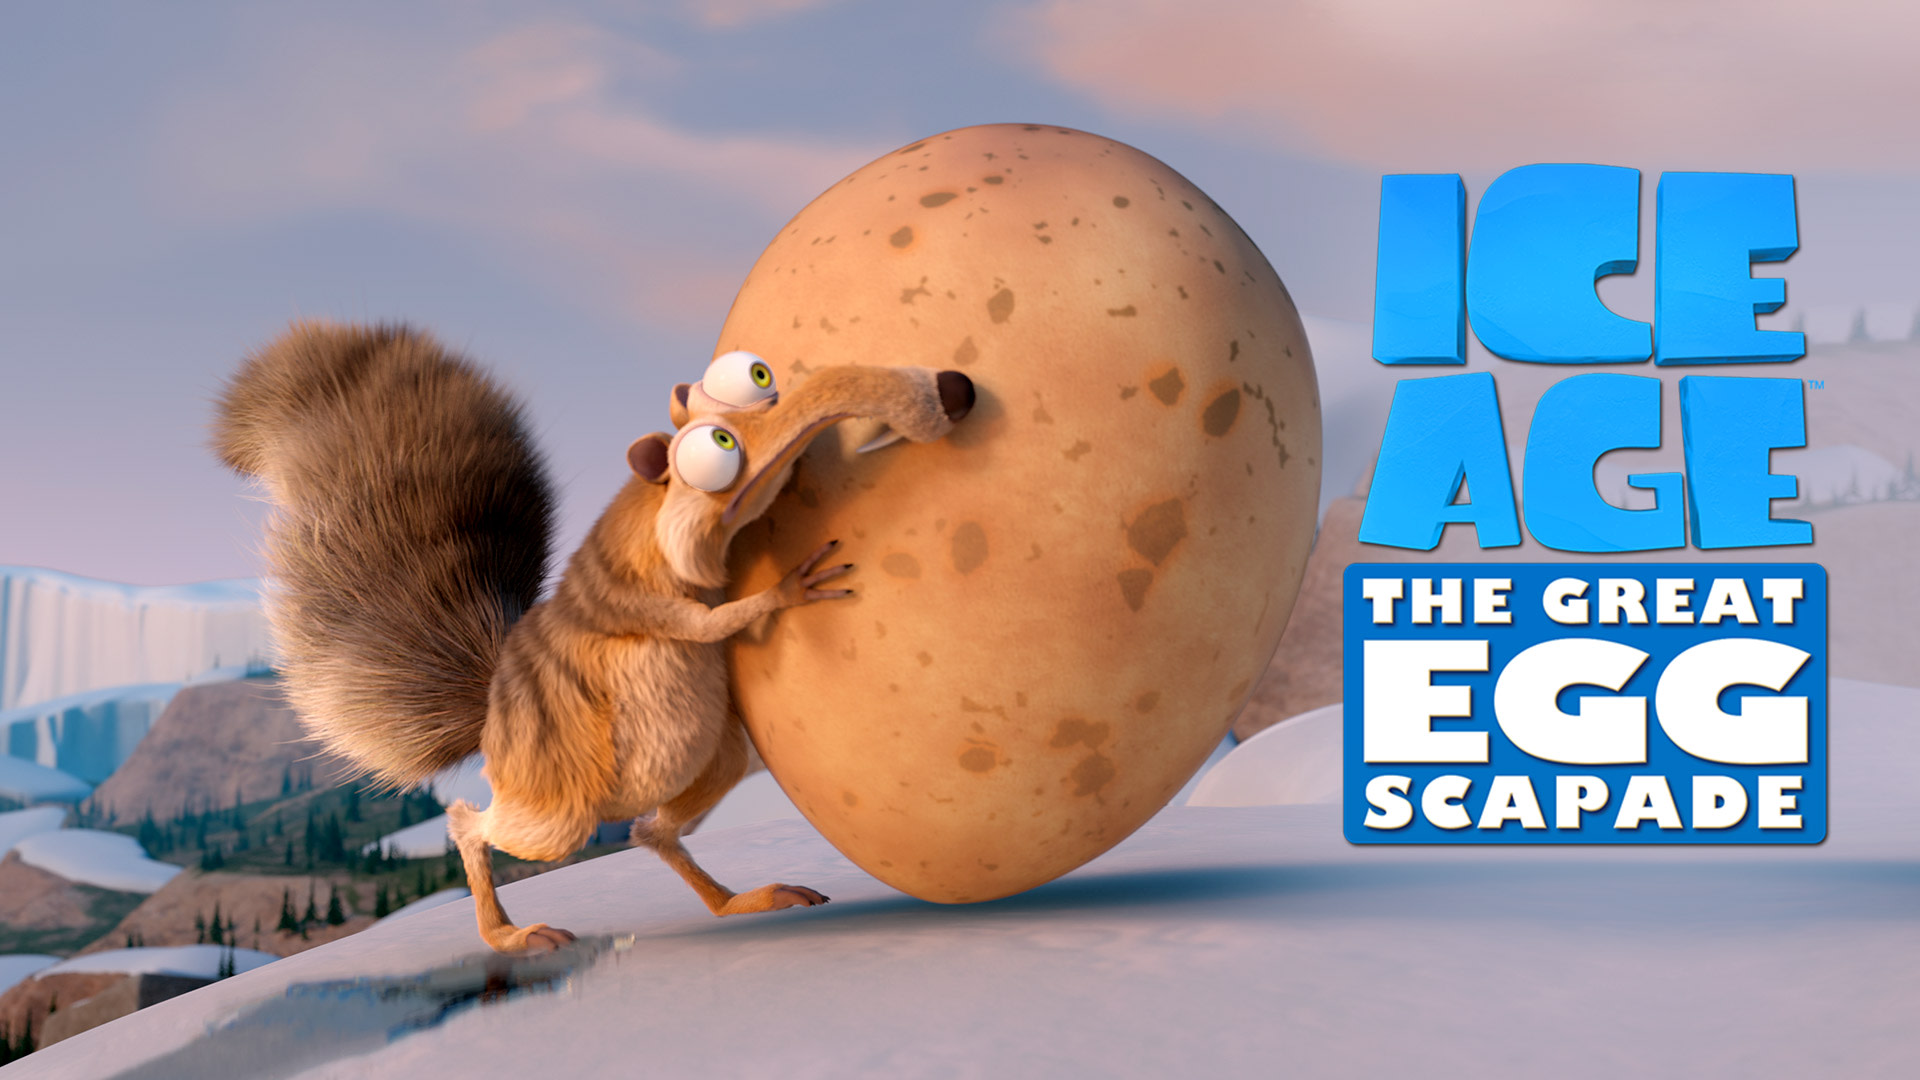 Watch Movie Ice Age The Great Egg Scapade Only On Watcho